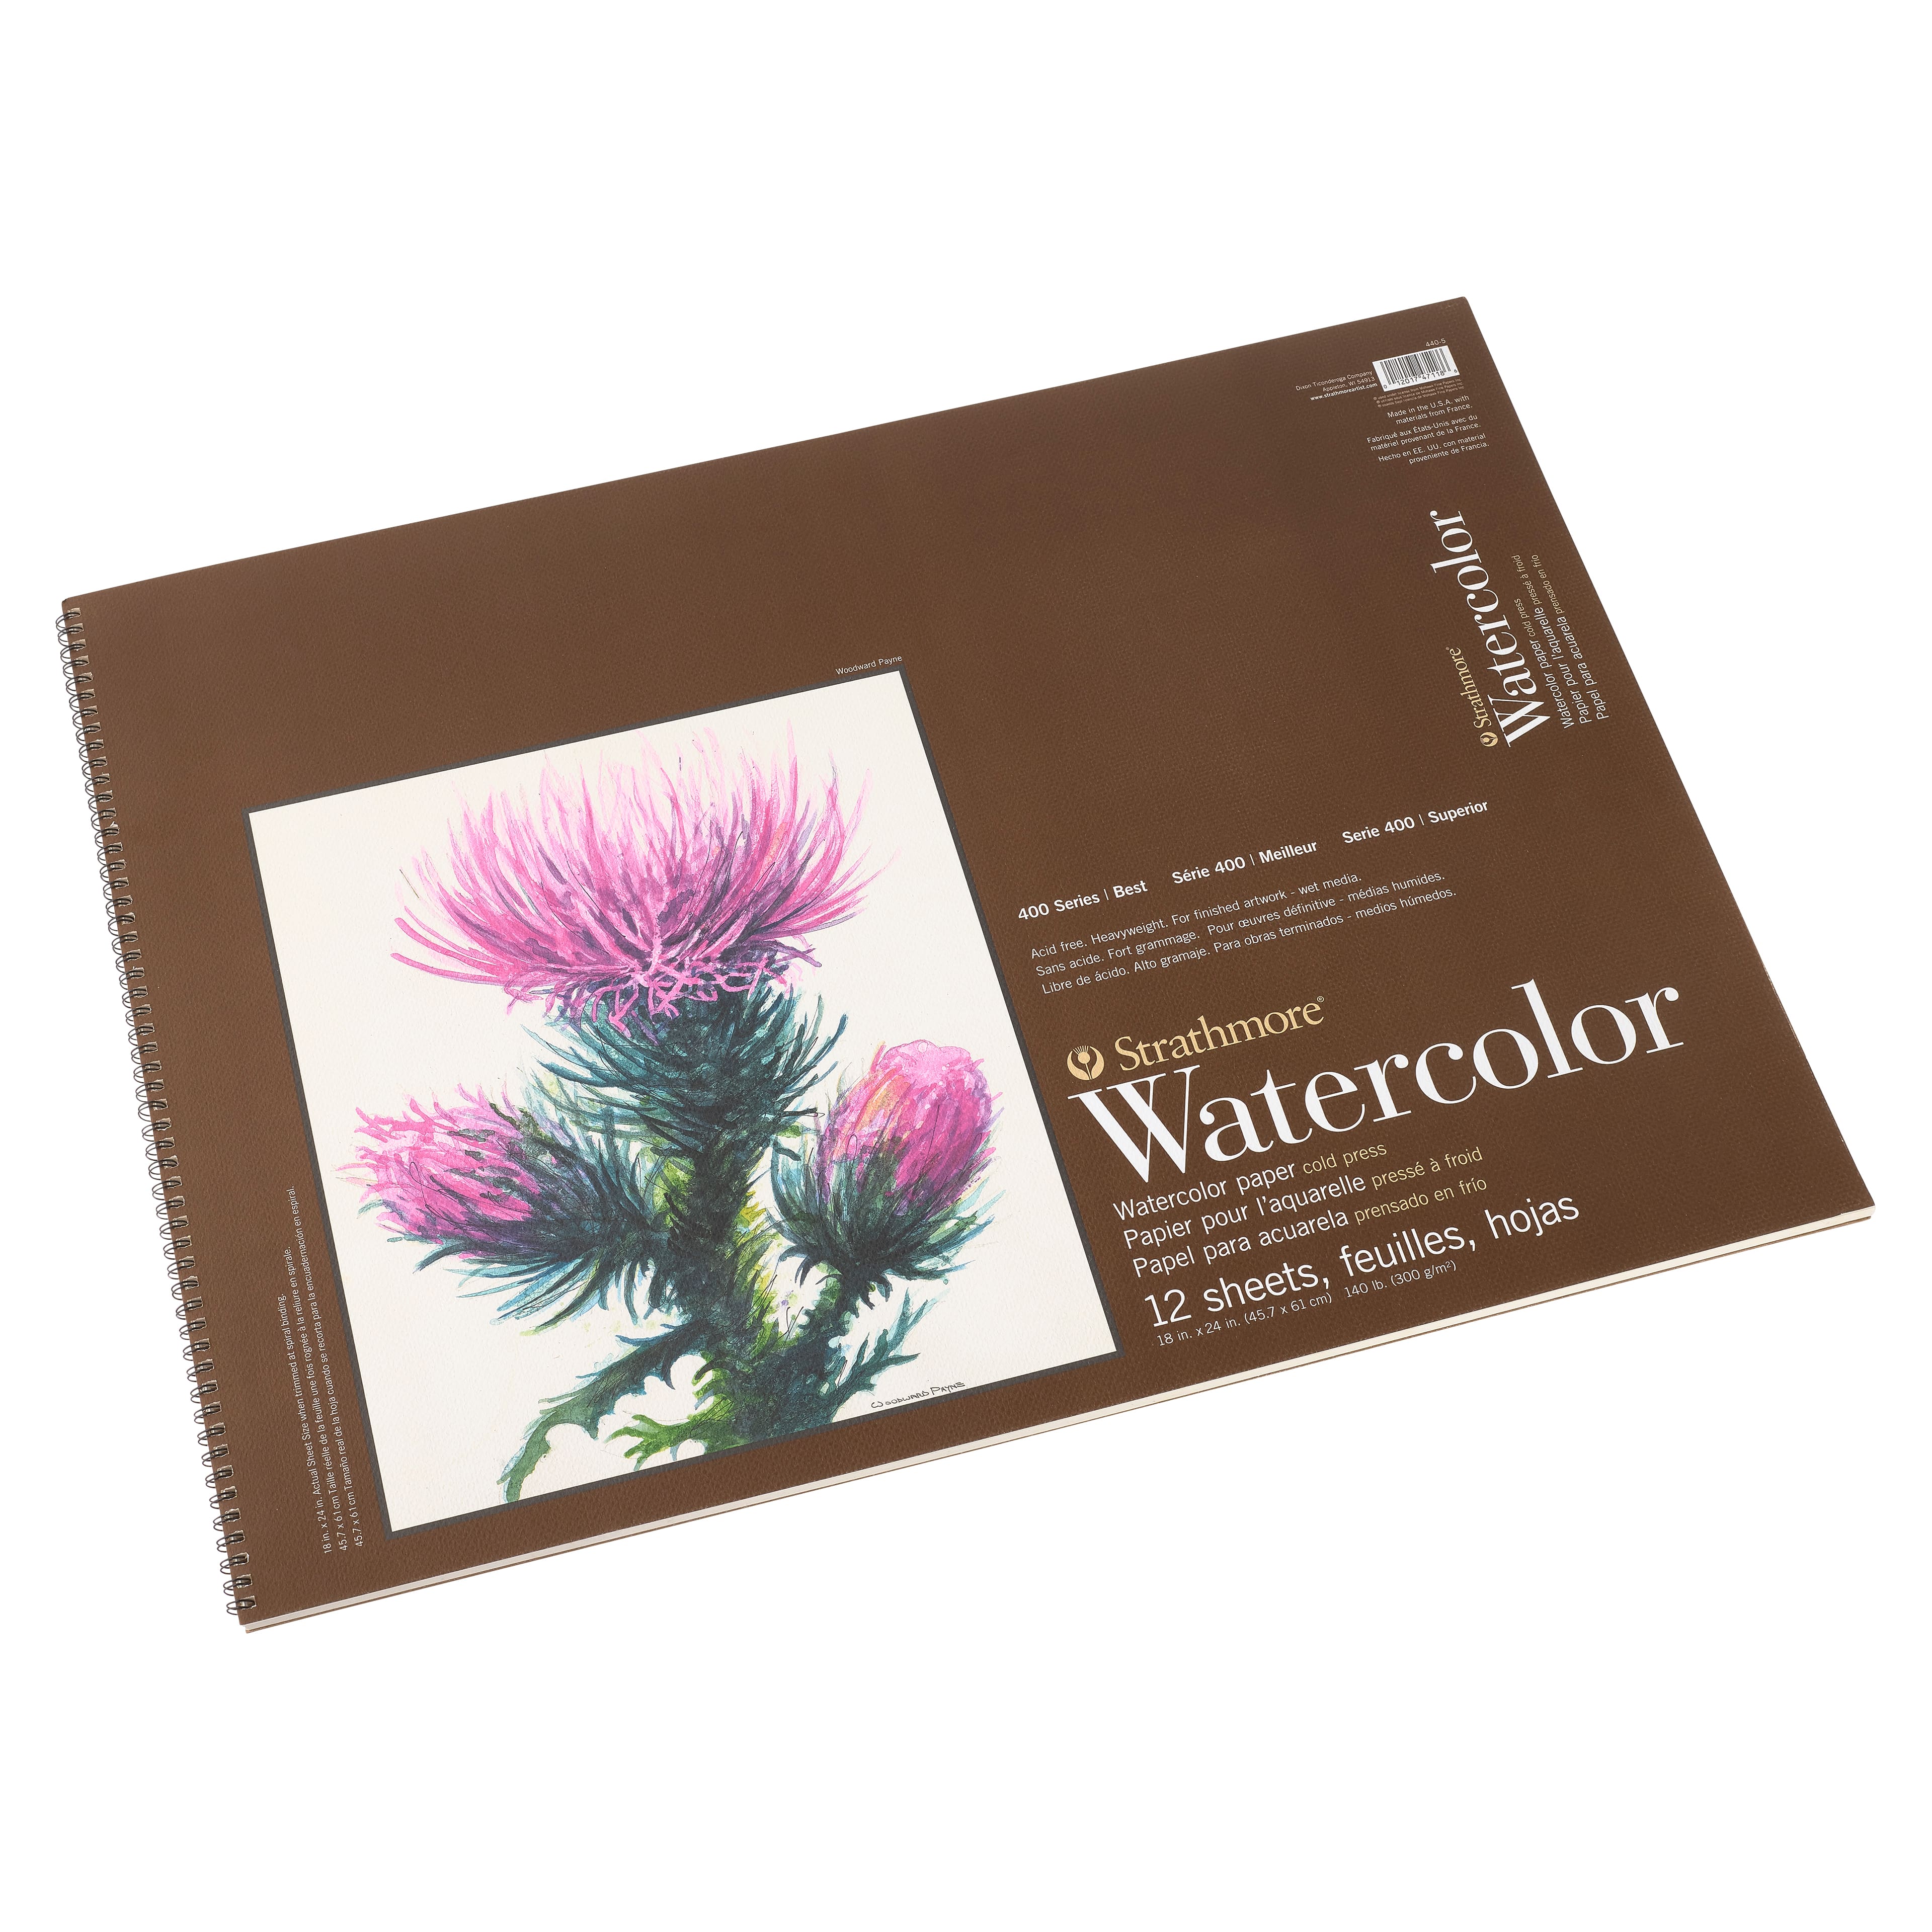 Strathmore Watercolor Pad - Meininger Art Supply